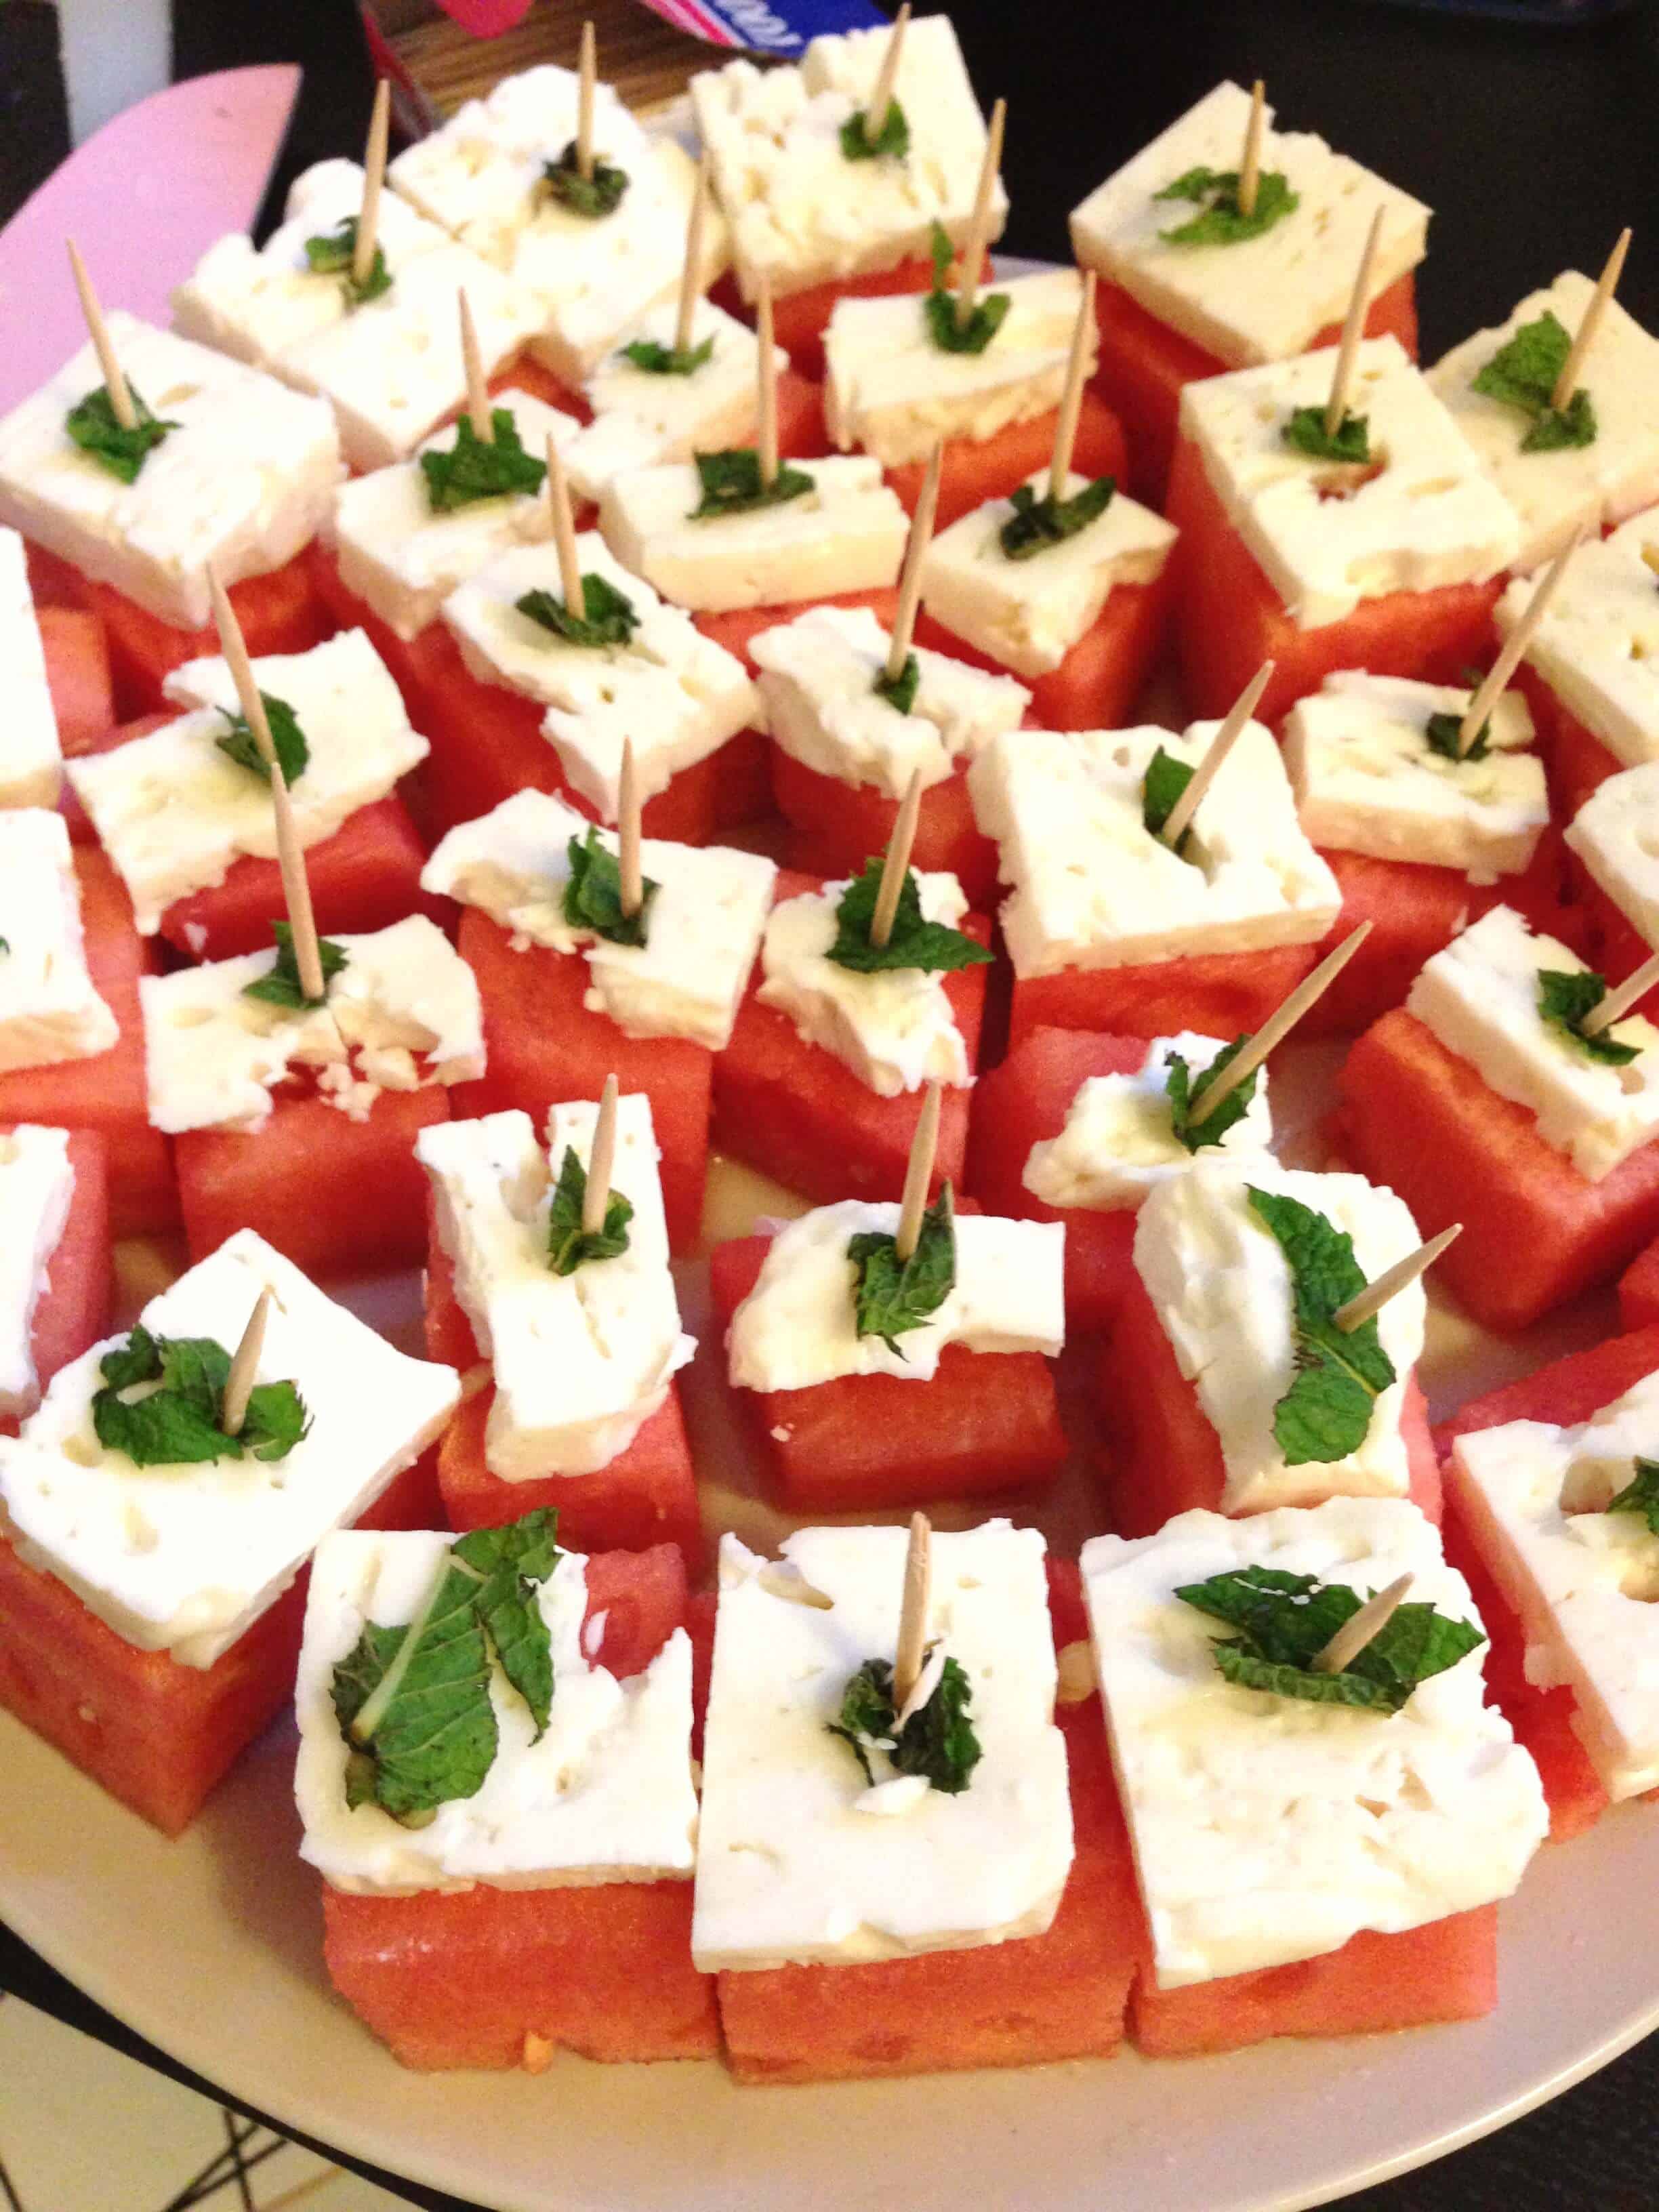 image of watermelon feta bites garnished with a bit of fresh mint